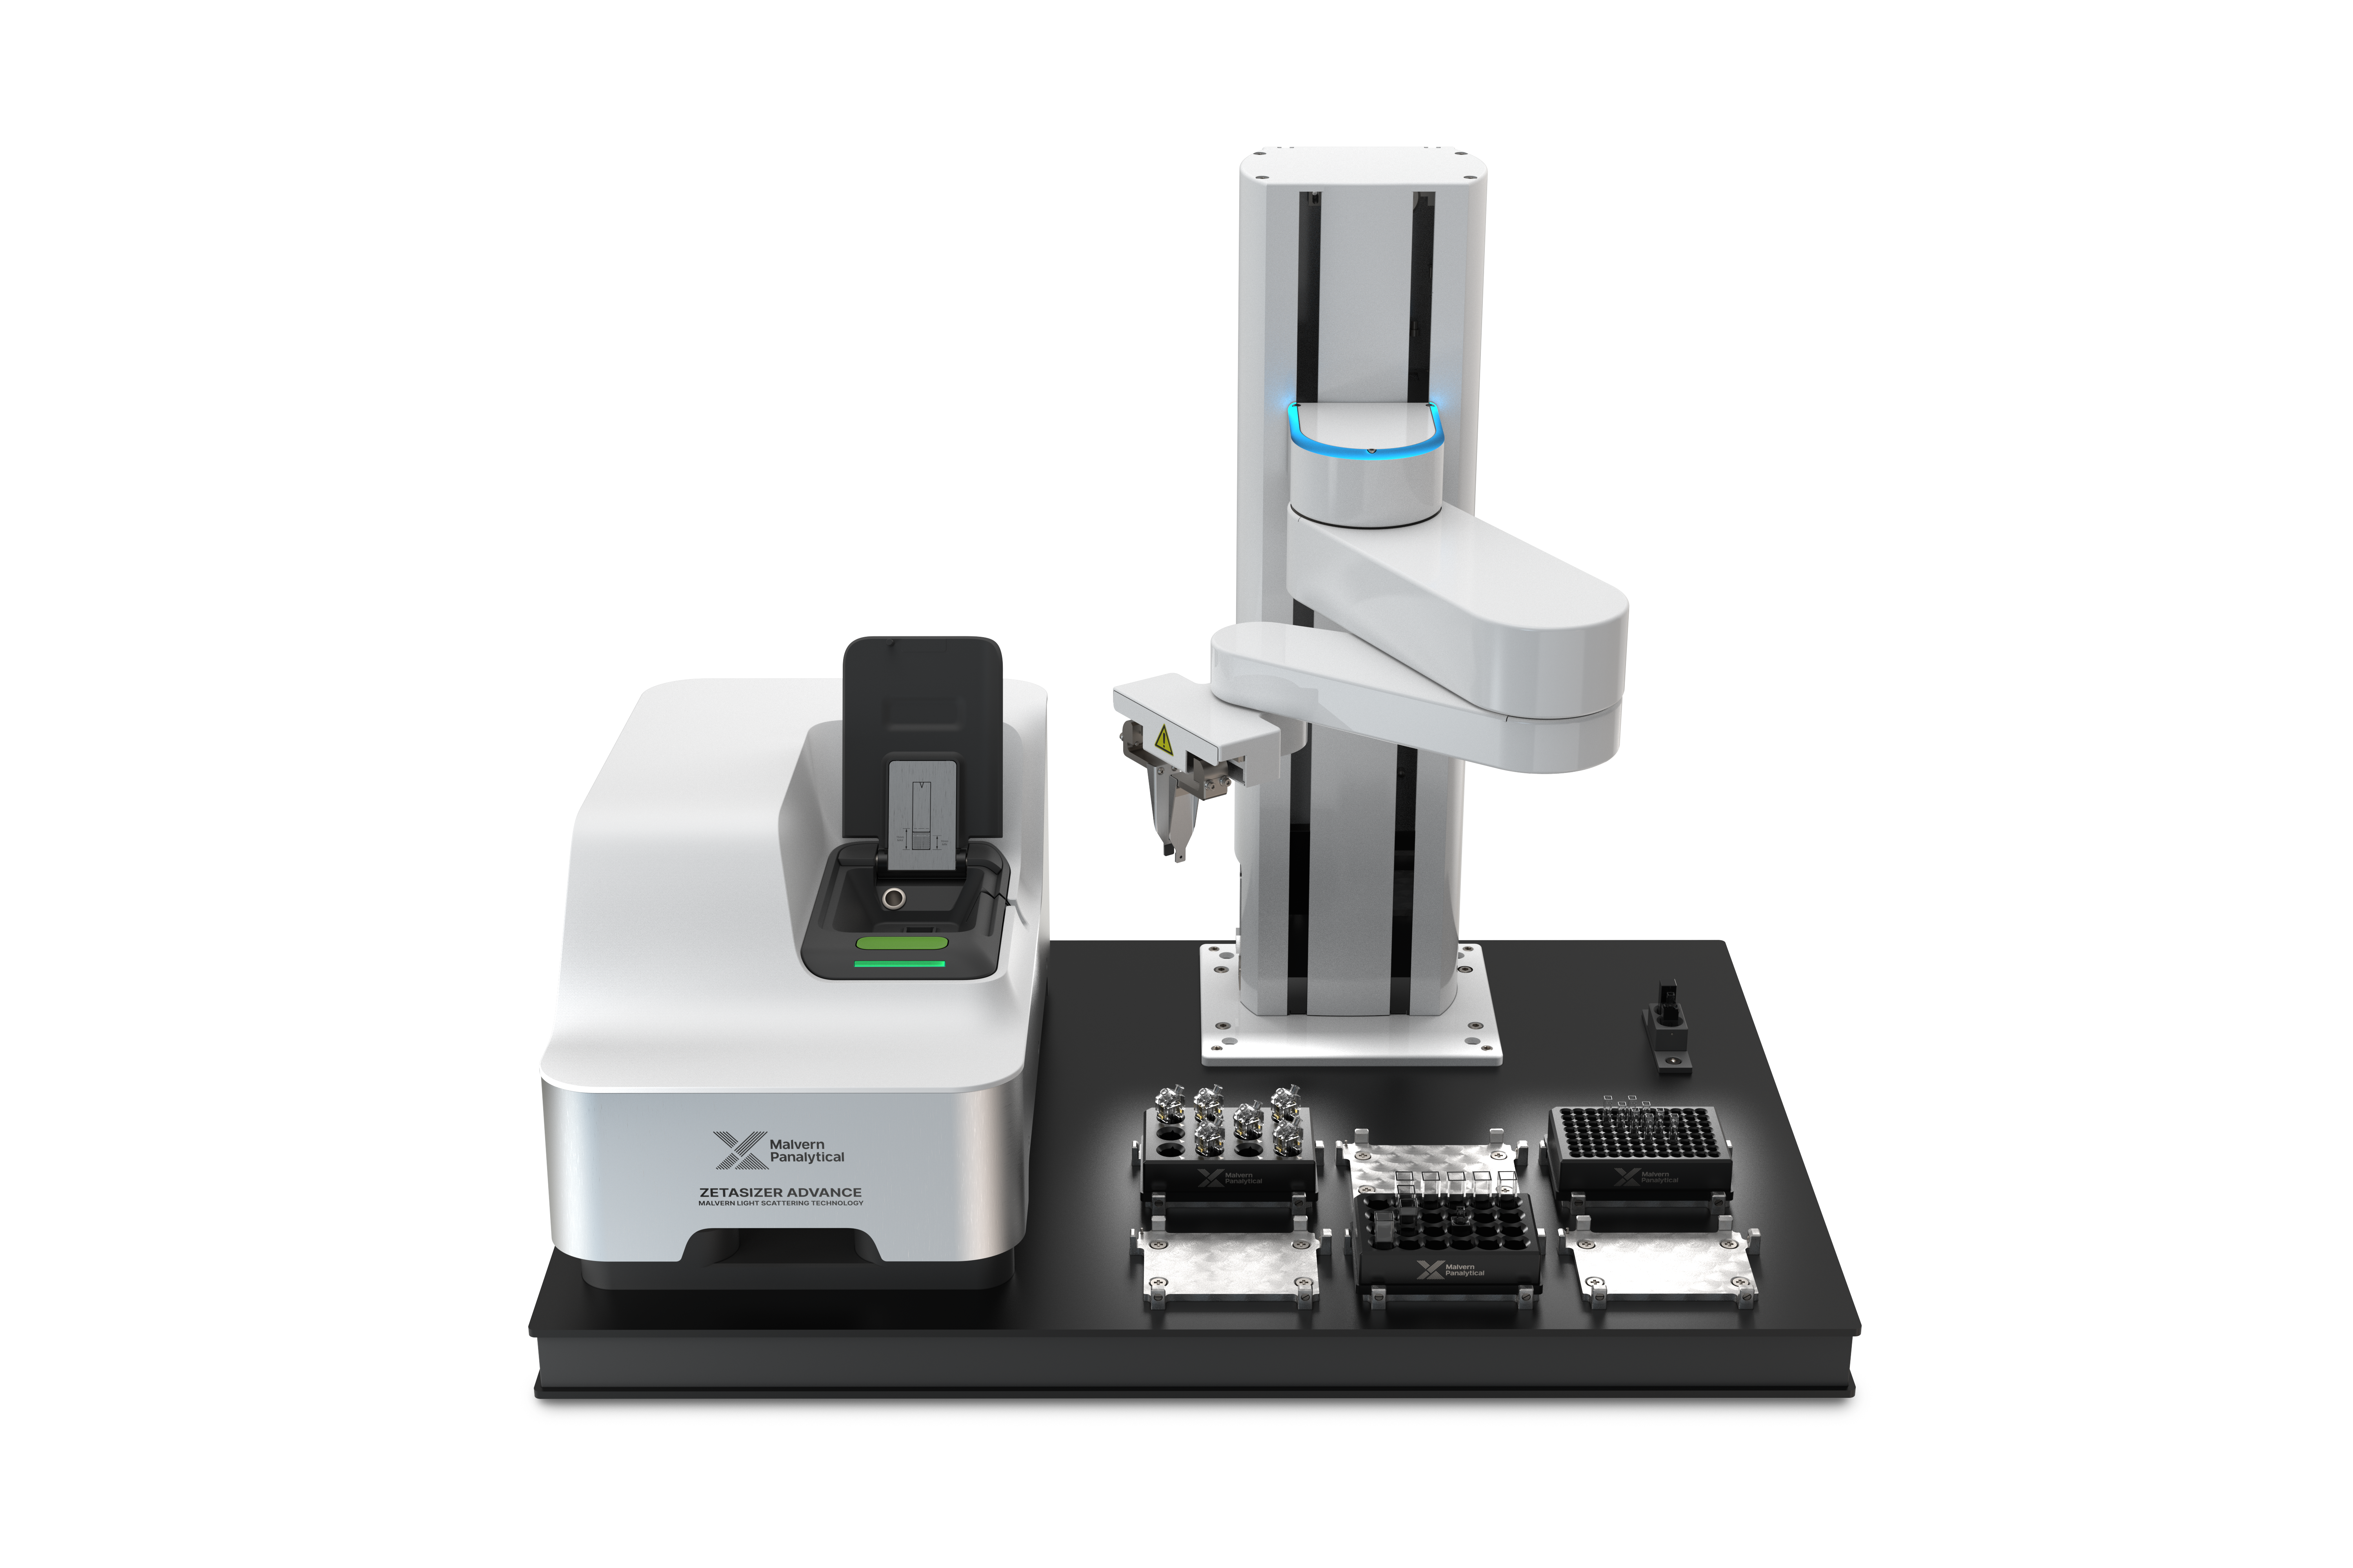 Zetasizer Sample Assistant For Automated Sample Analysis